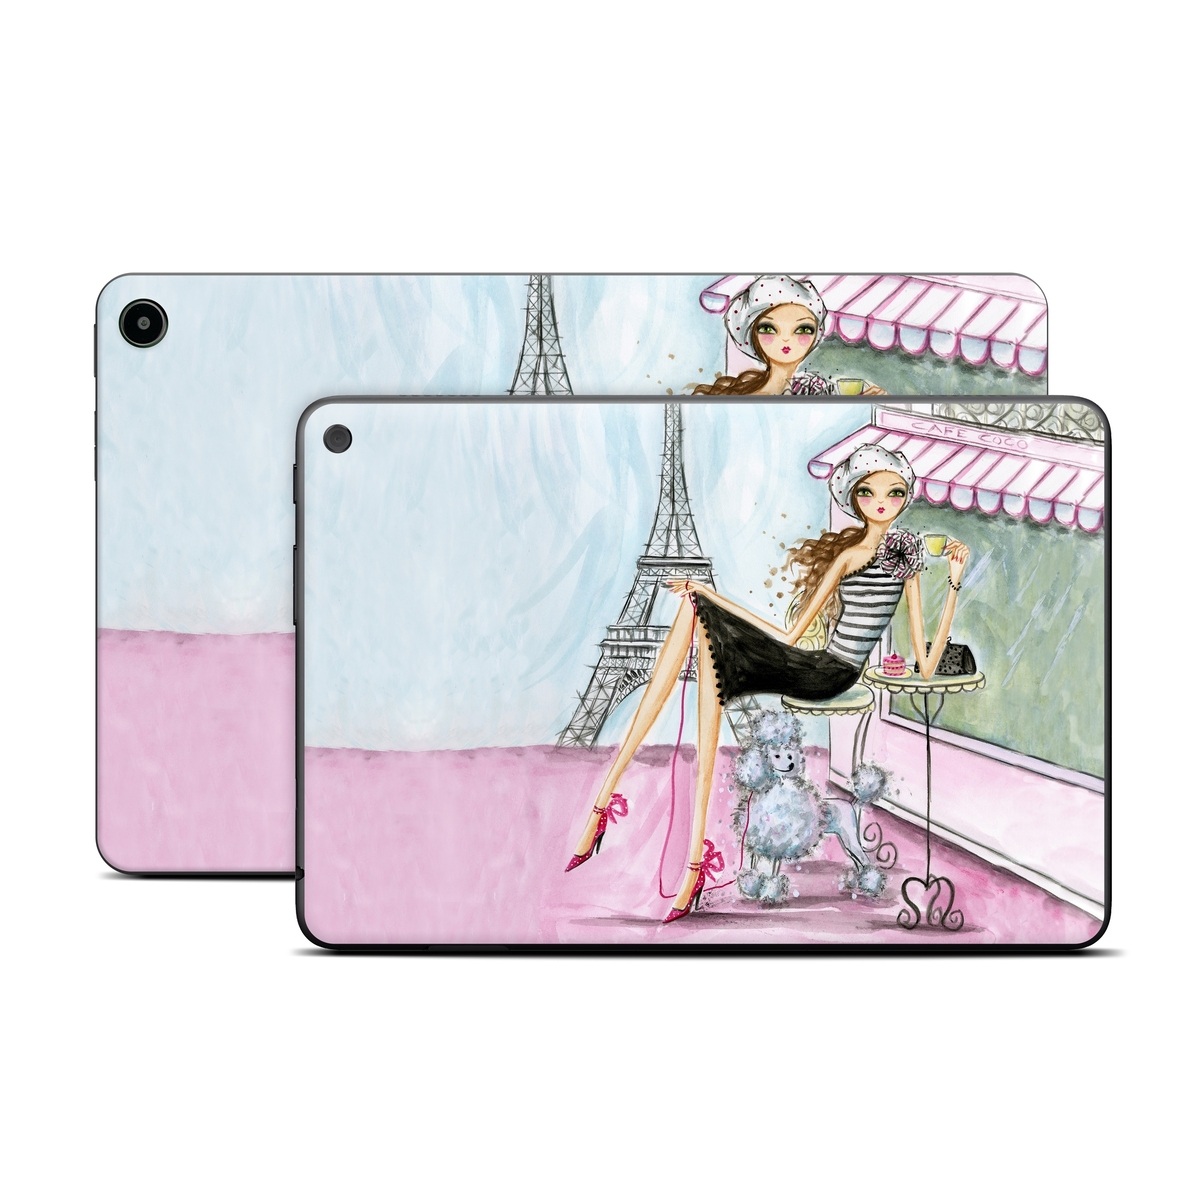 Amazon Fire Tablet Series Skin Skin design of Pink, Illustration, Sitting, Konghou, Watercolor paint, Fashion illustration, Art, Drawing, Style, with gray, purple, blue, black, pink colors